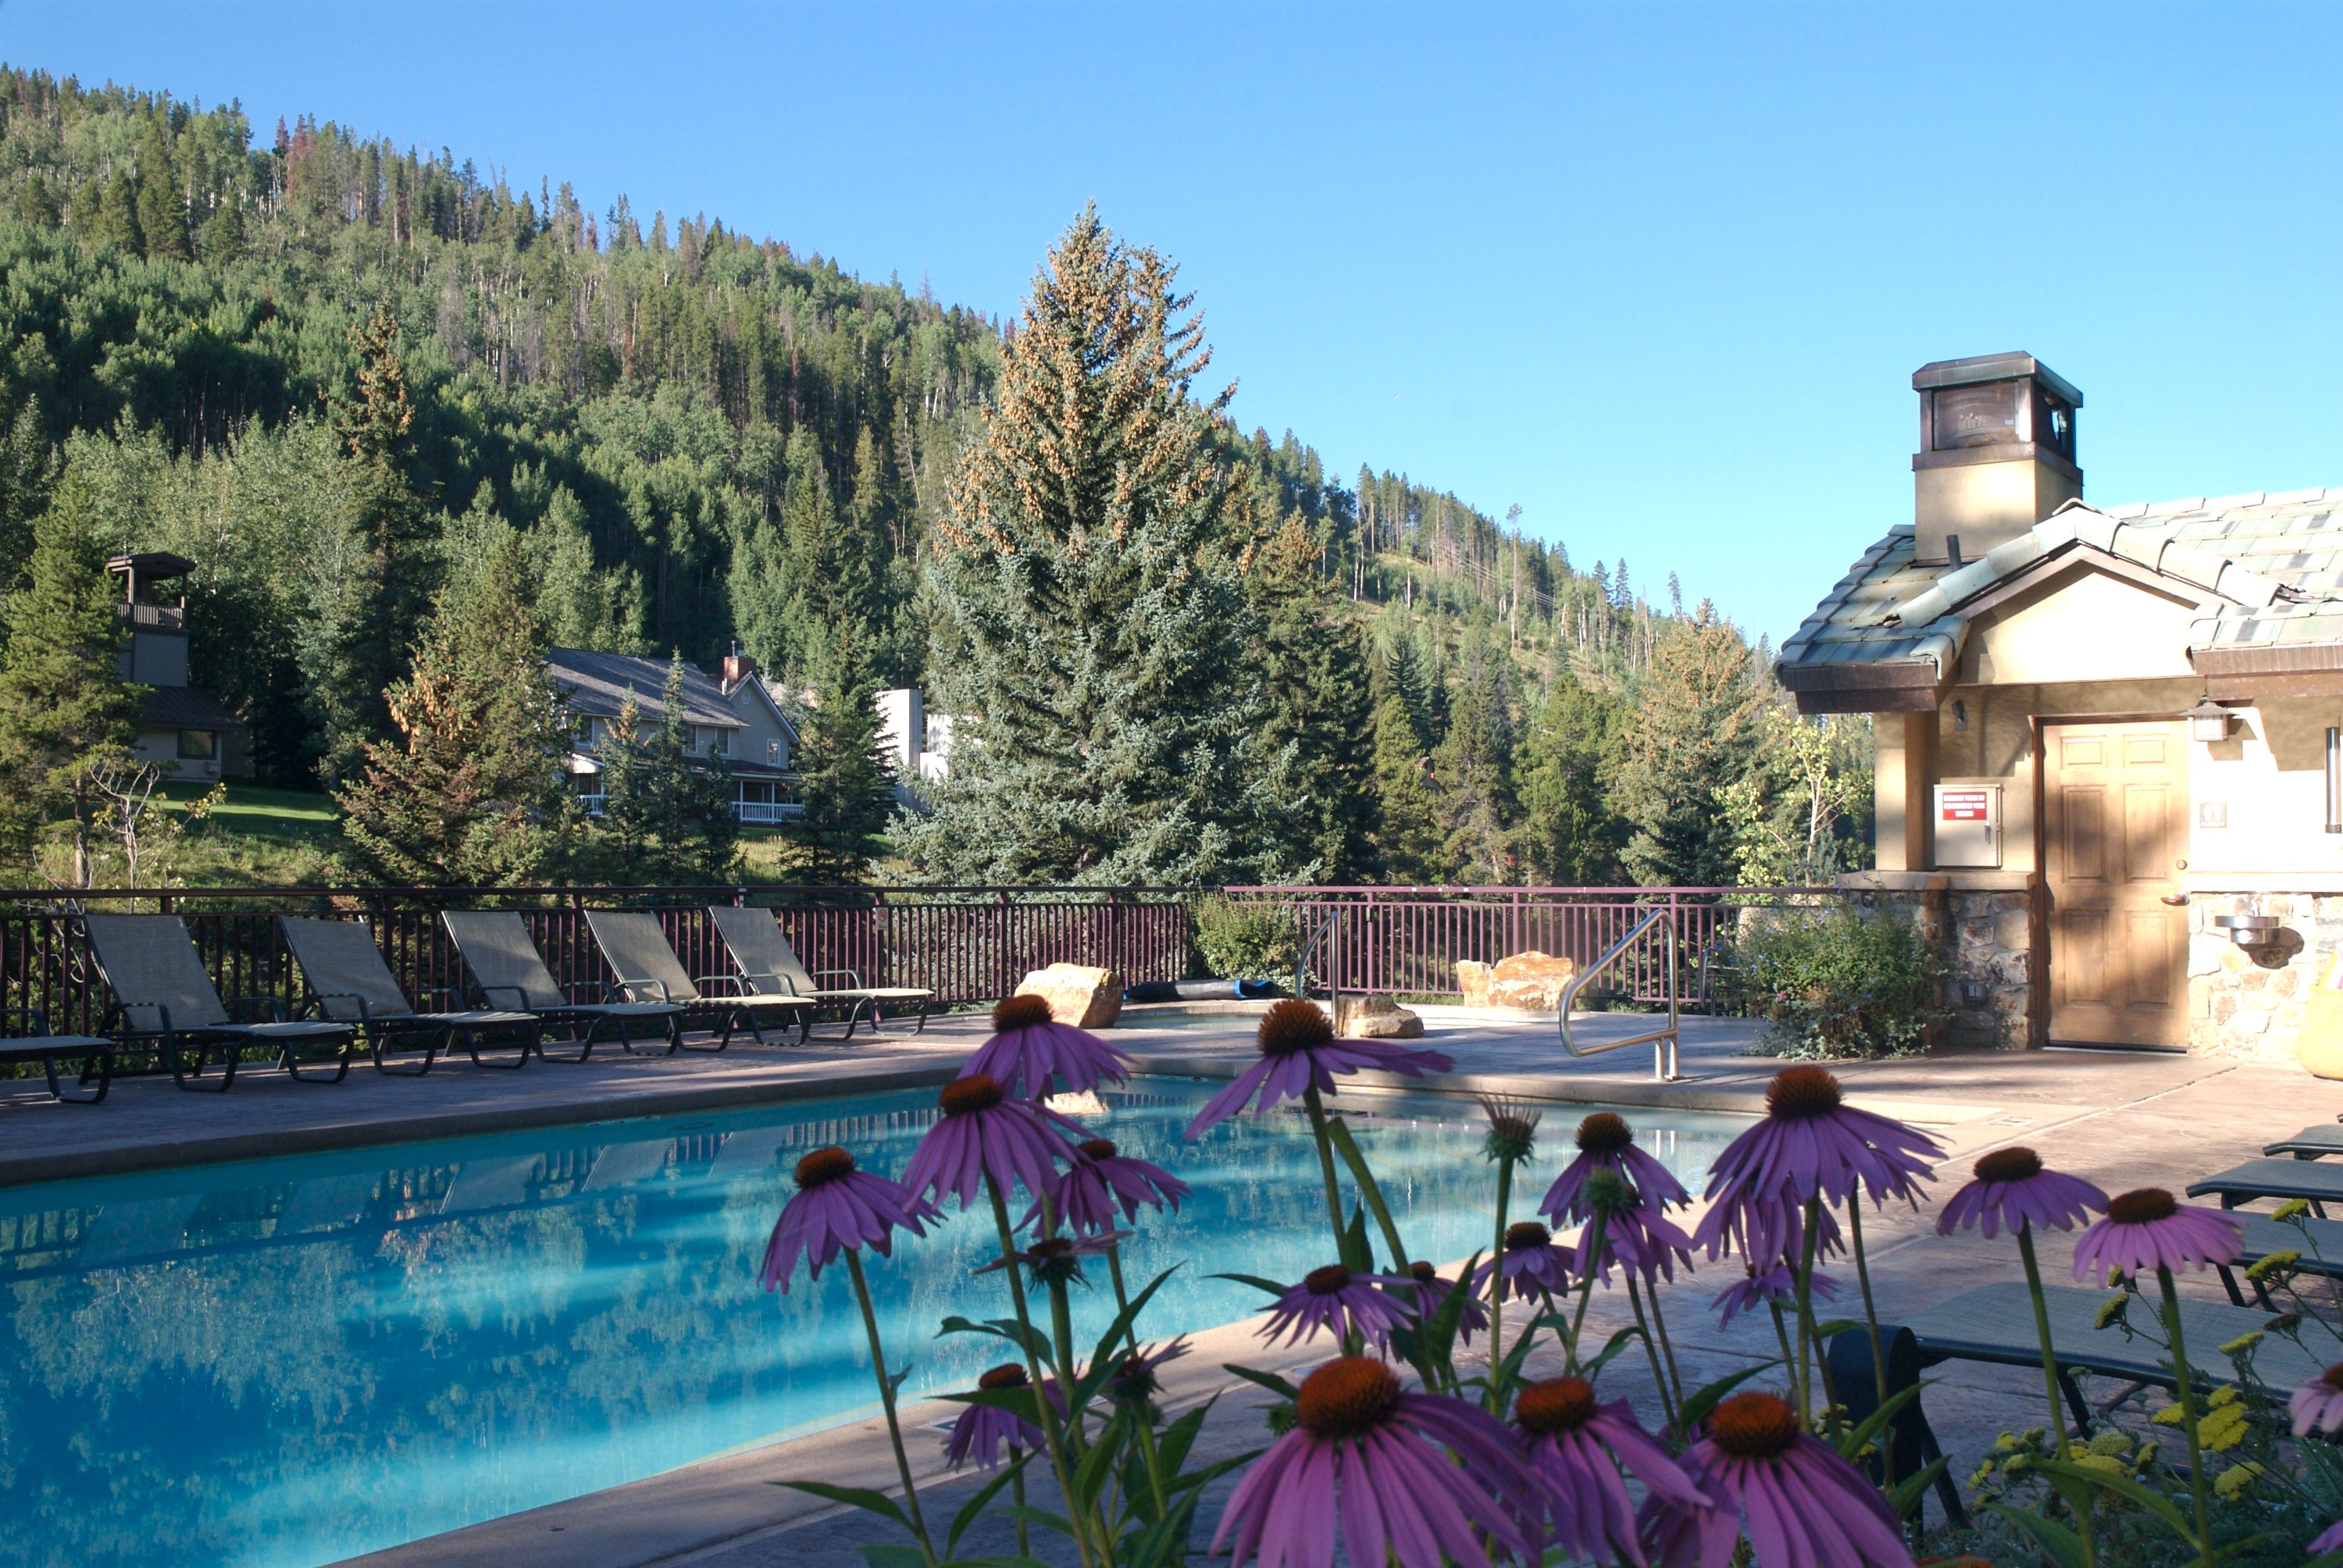 Antlers at Vail hotel’s “pool with a view” overlooks Vail Mountain and rushing Gore Creek with two hot tubs for relaxing muscles tired from the day’s activities.